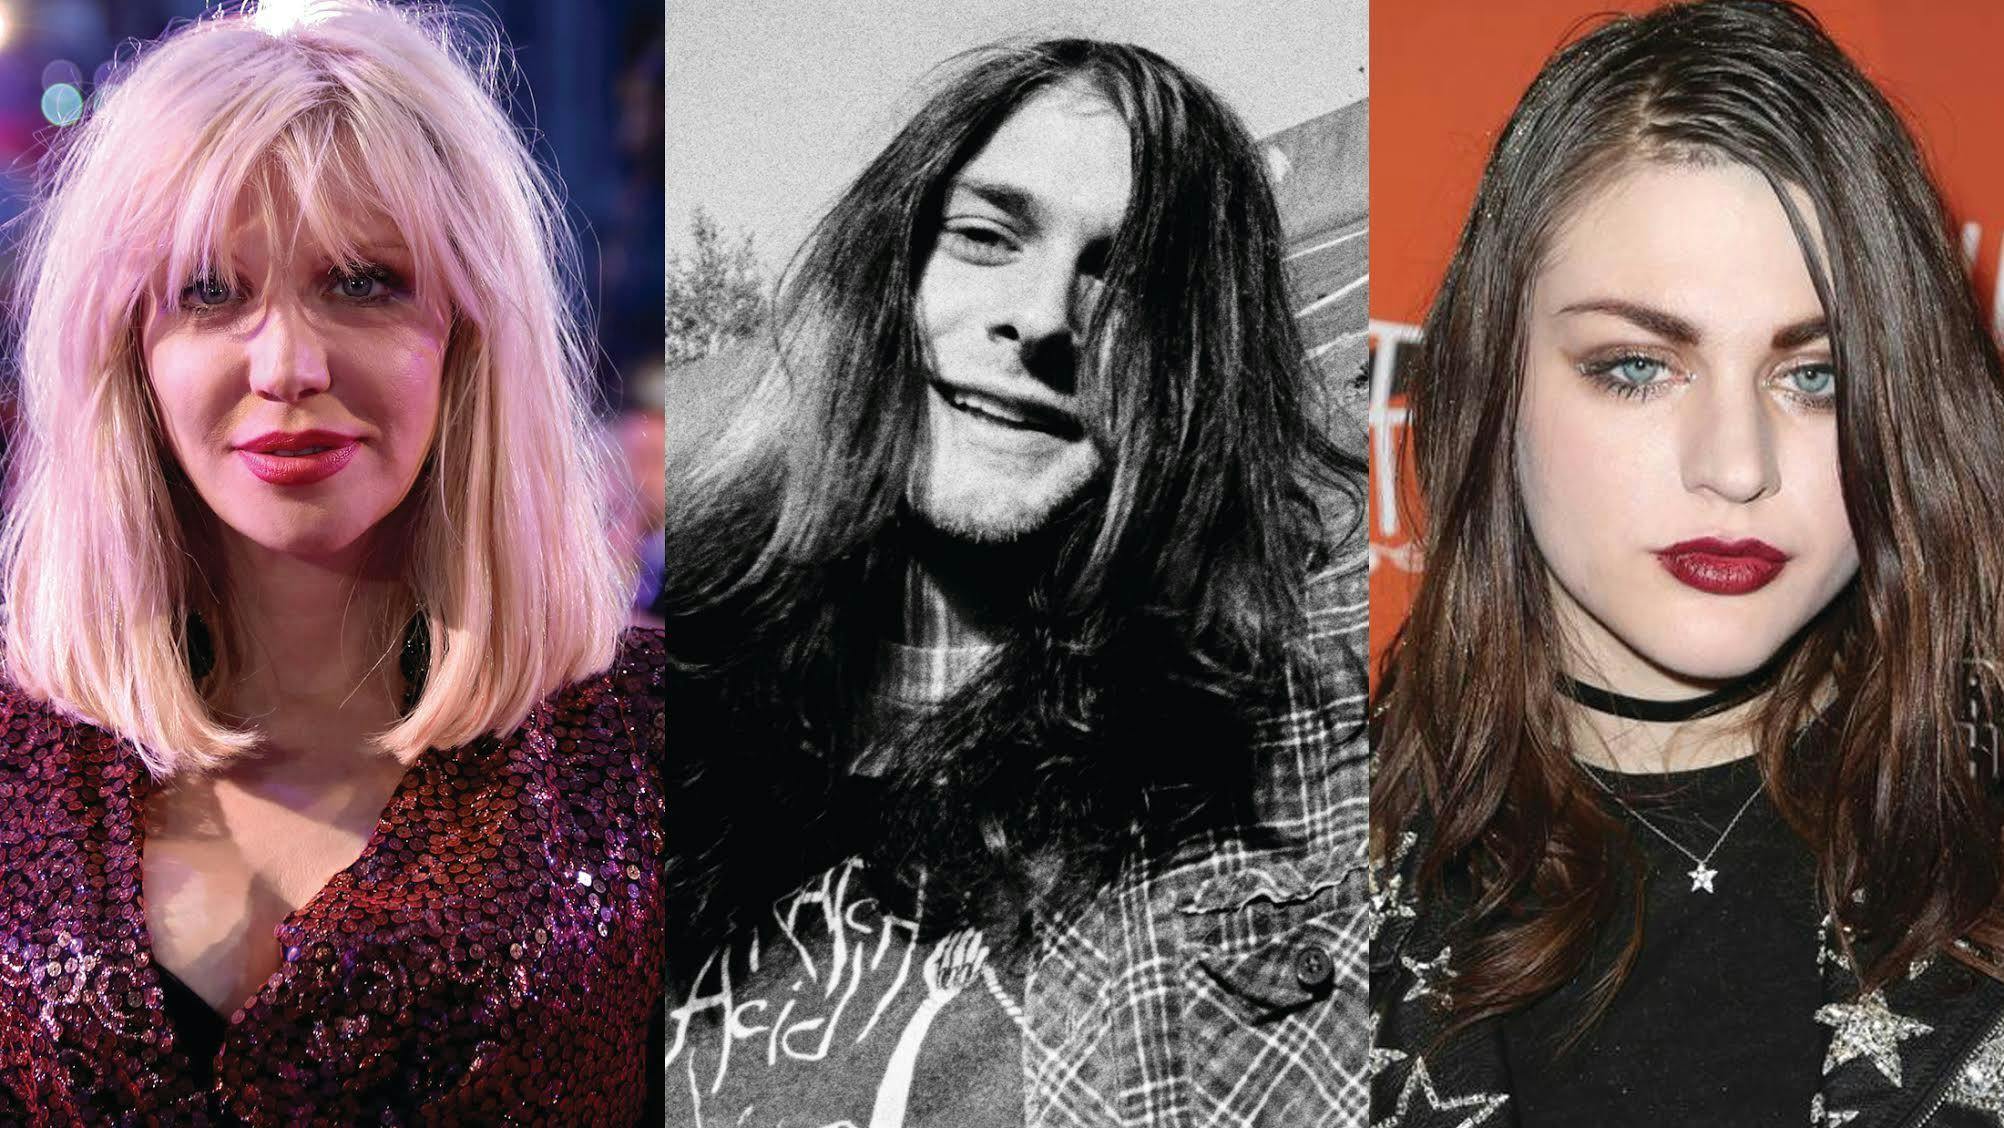 Courtney Love And Frances Bean Cobain Fight to Keep Kurt Cobain Death Photos From Being Released